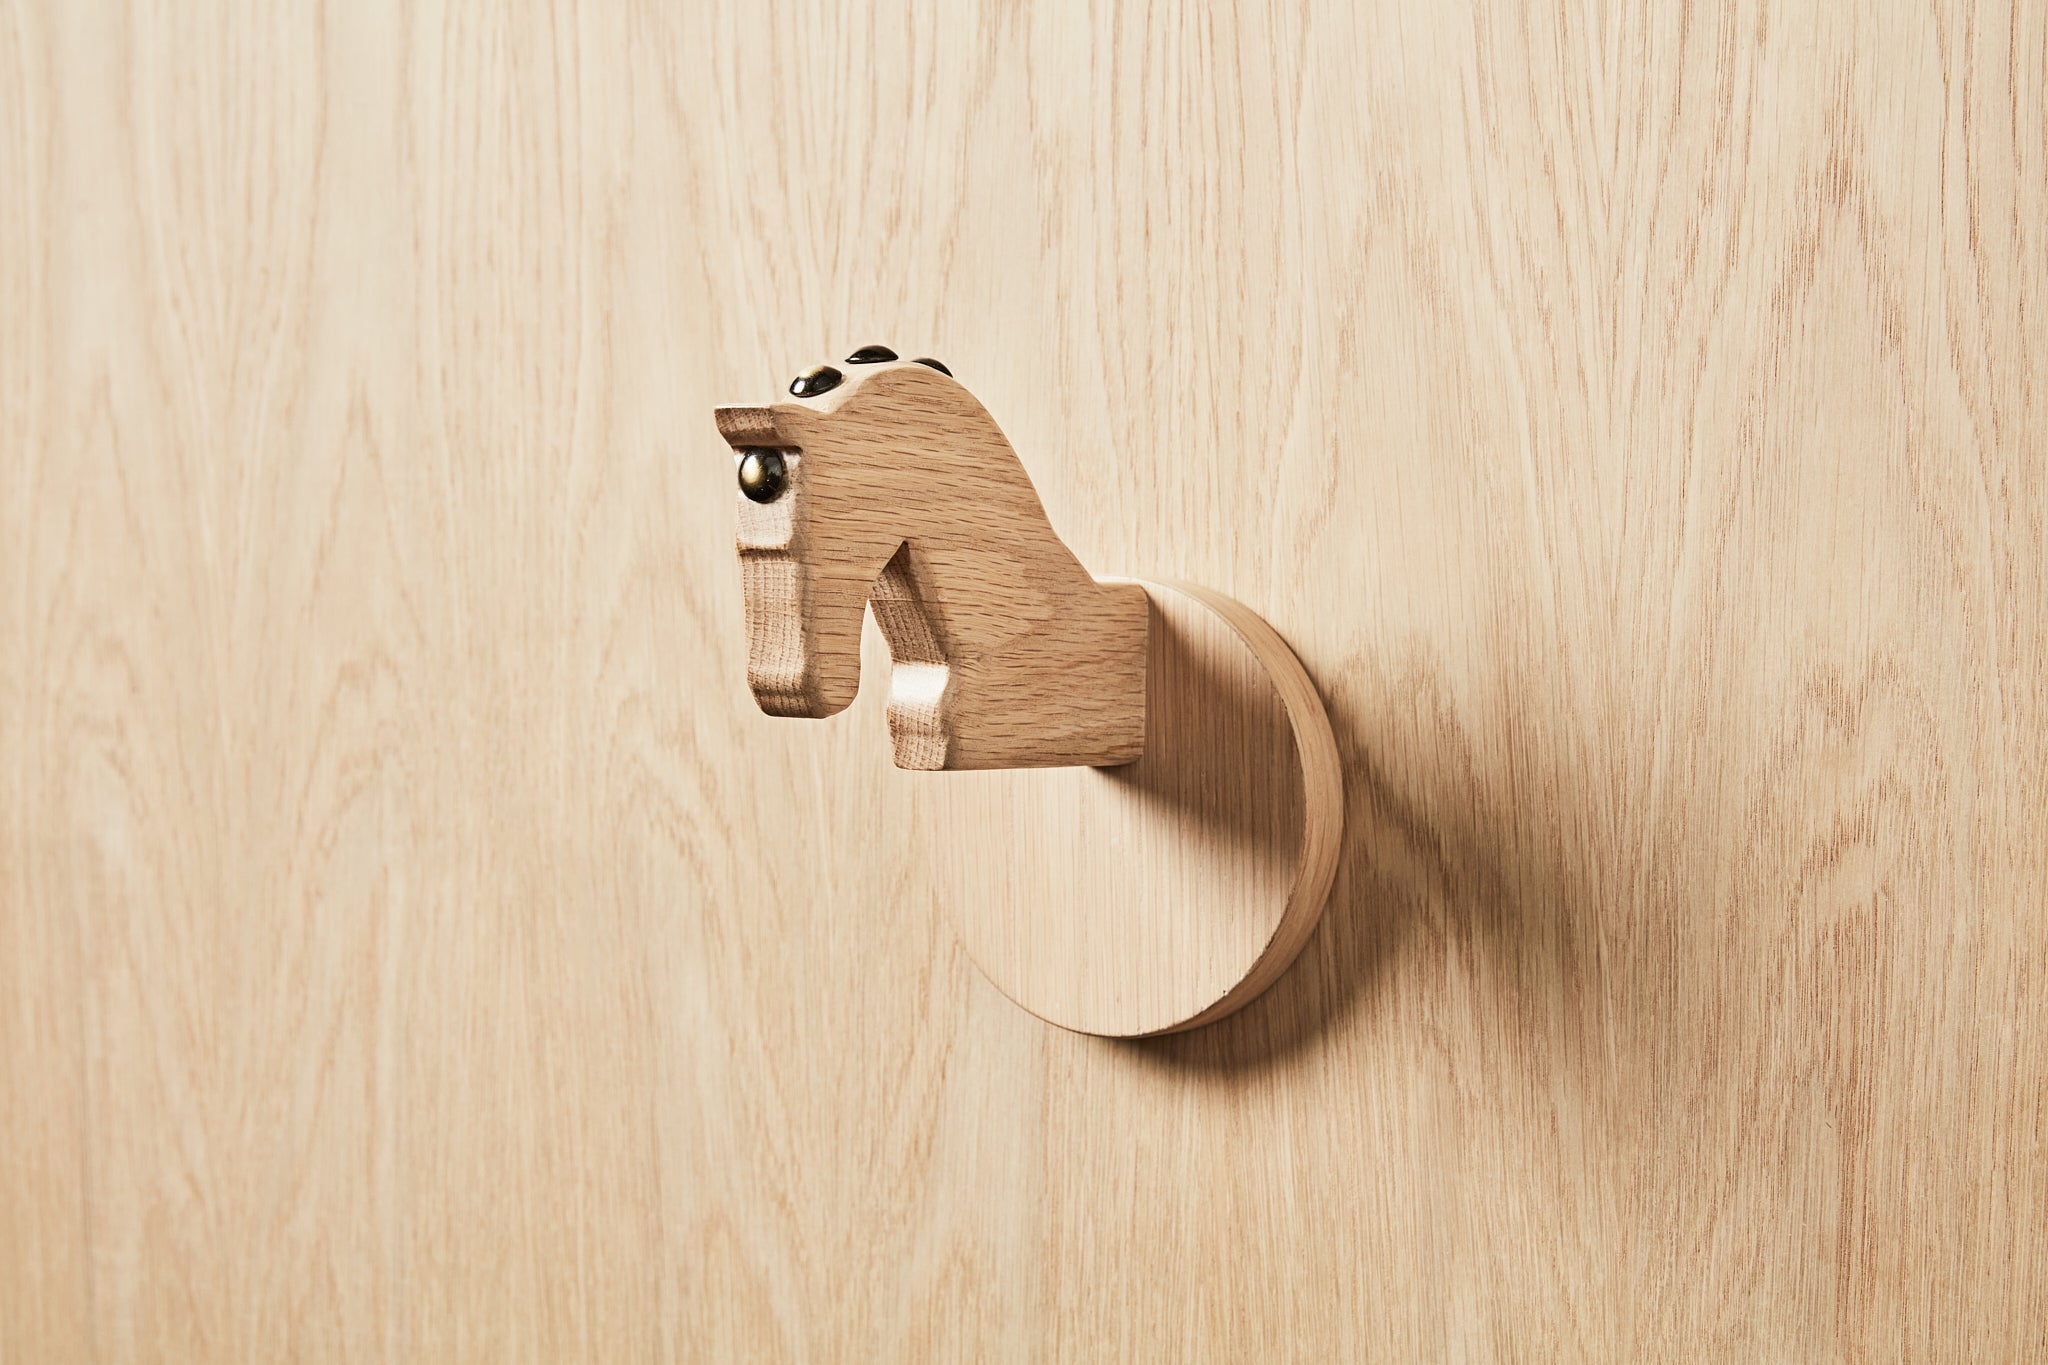 Horse Head Wall Hooks - With Studs